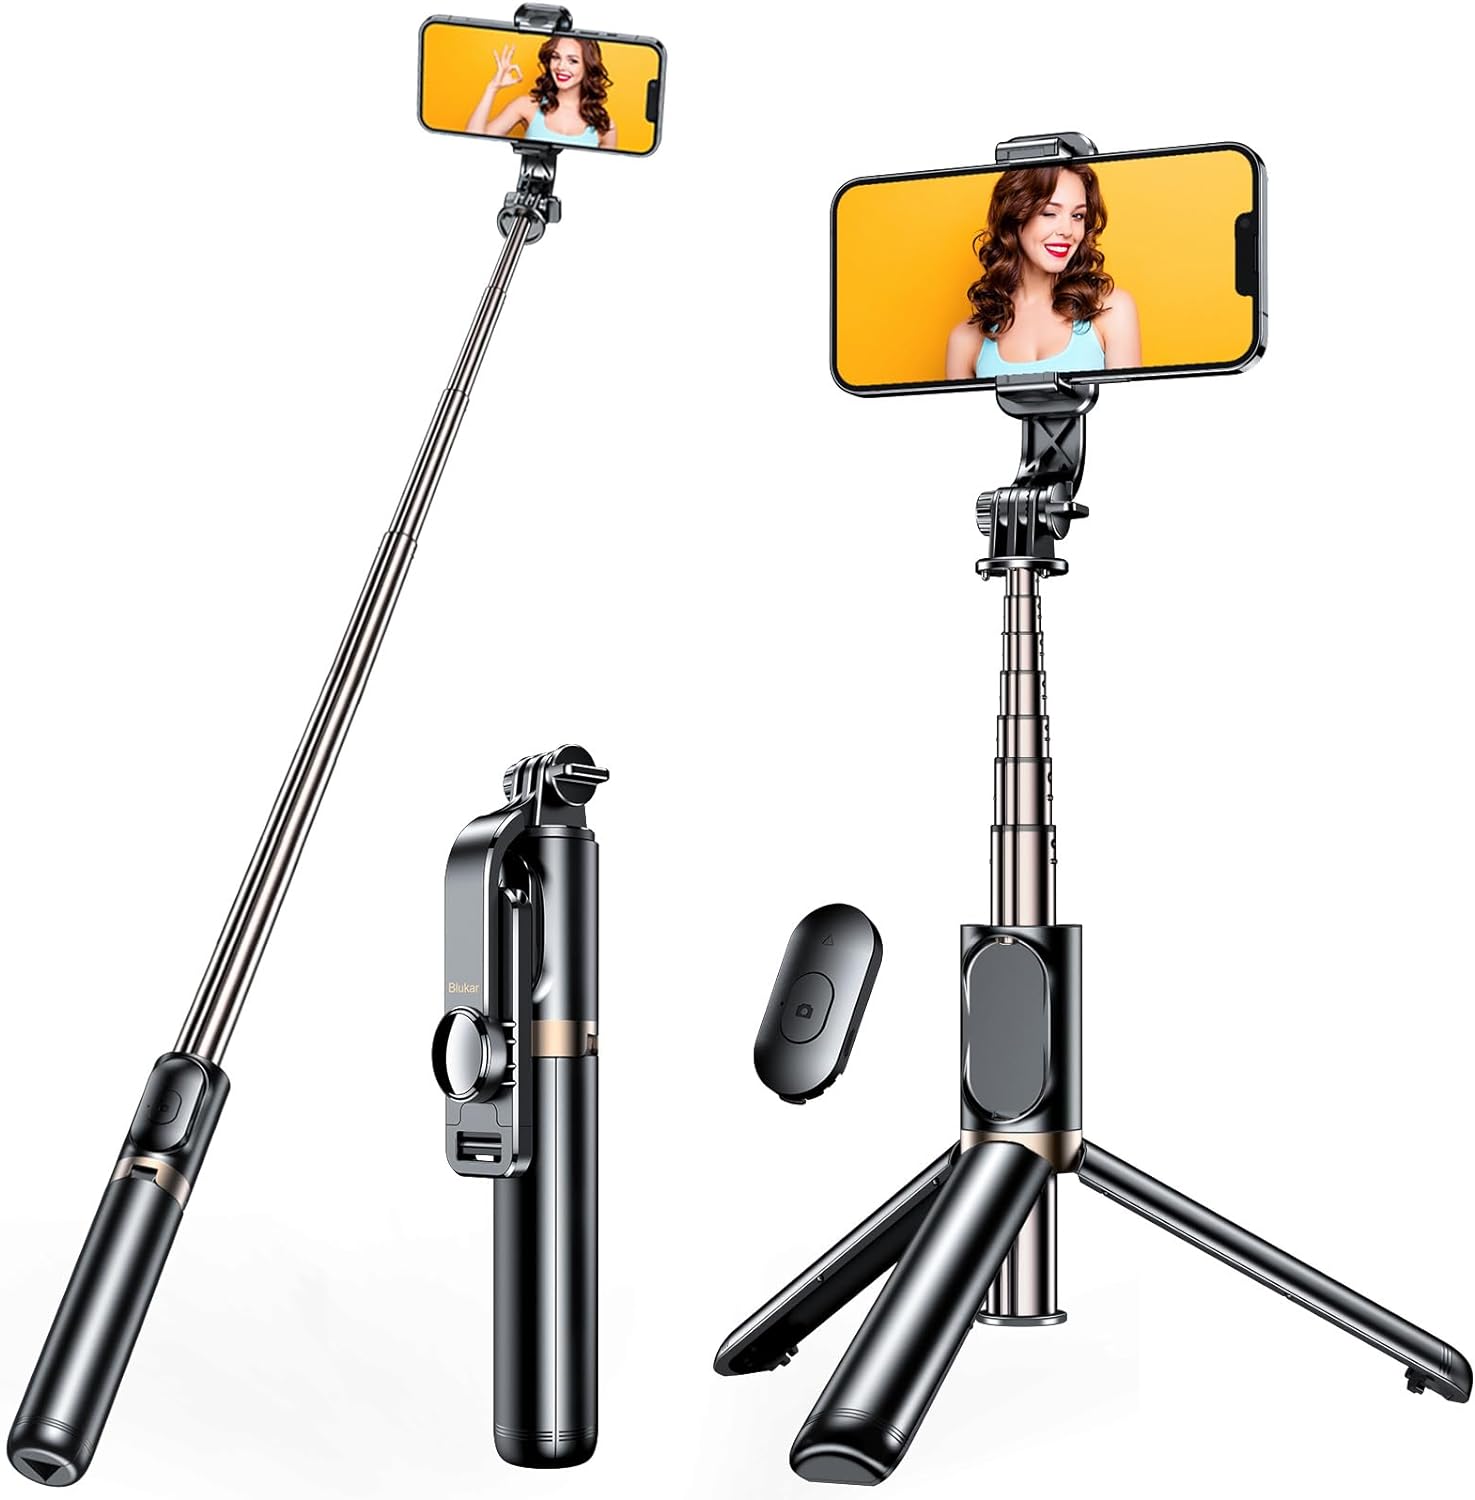 Blukar Selfie Stick, 4 in 1 Extendable Bluetooth- 360° Rotation Stable Tripod Stand with Detachable Wireless Remote